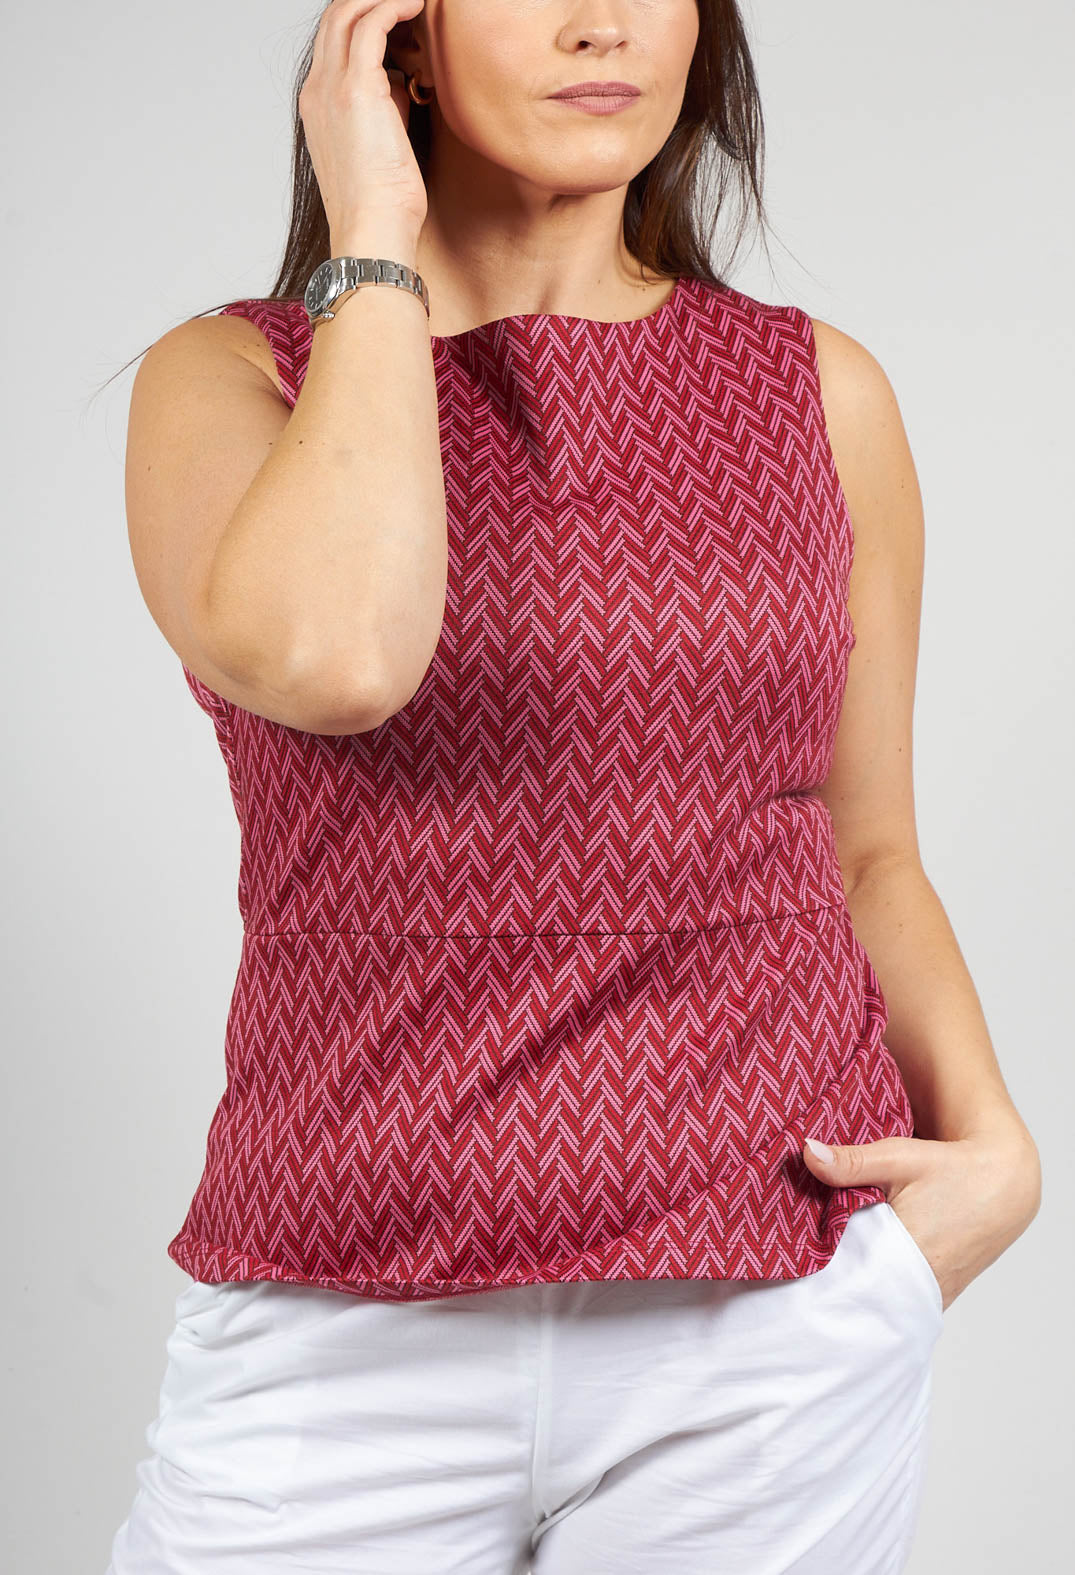 Sleeveless Patterned Top with Peplum in Candy